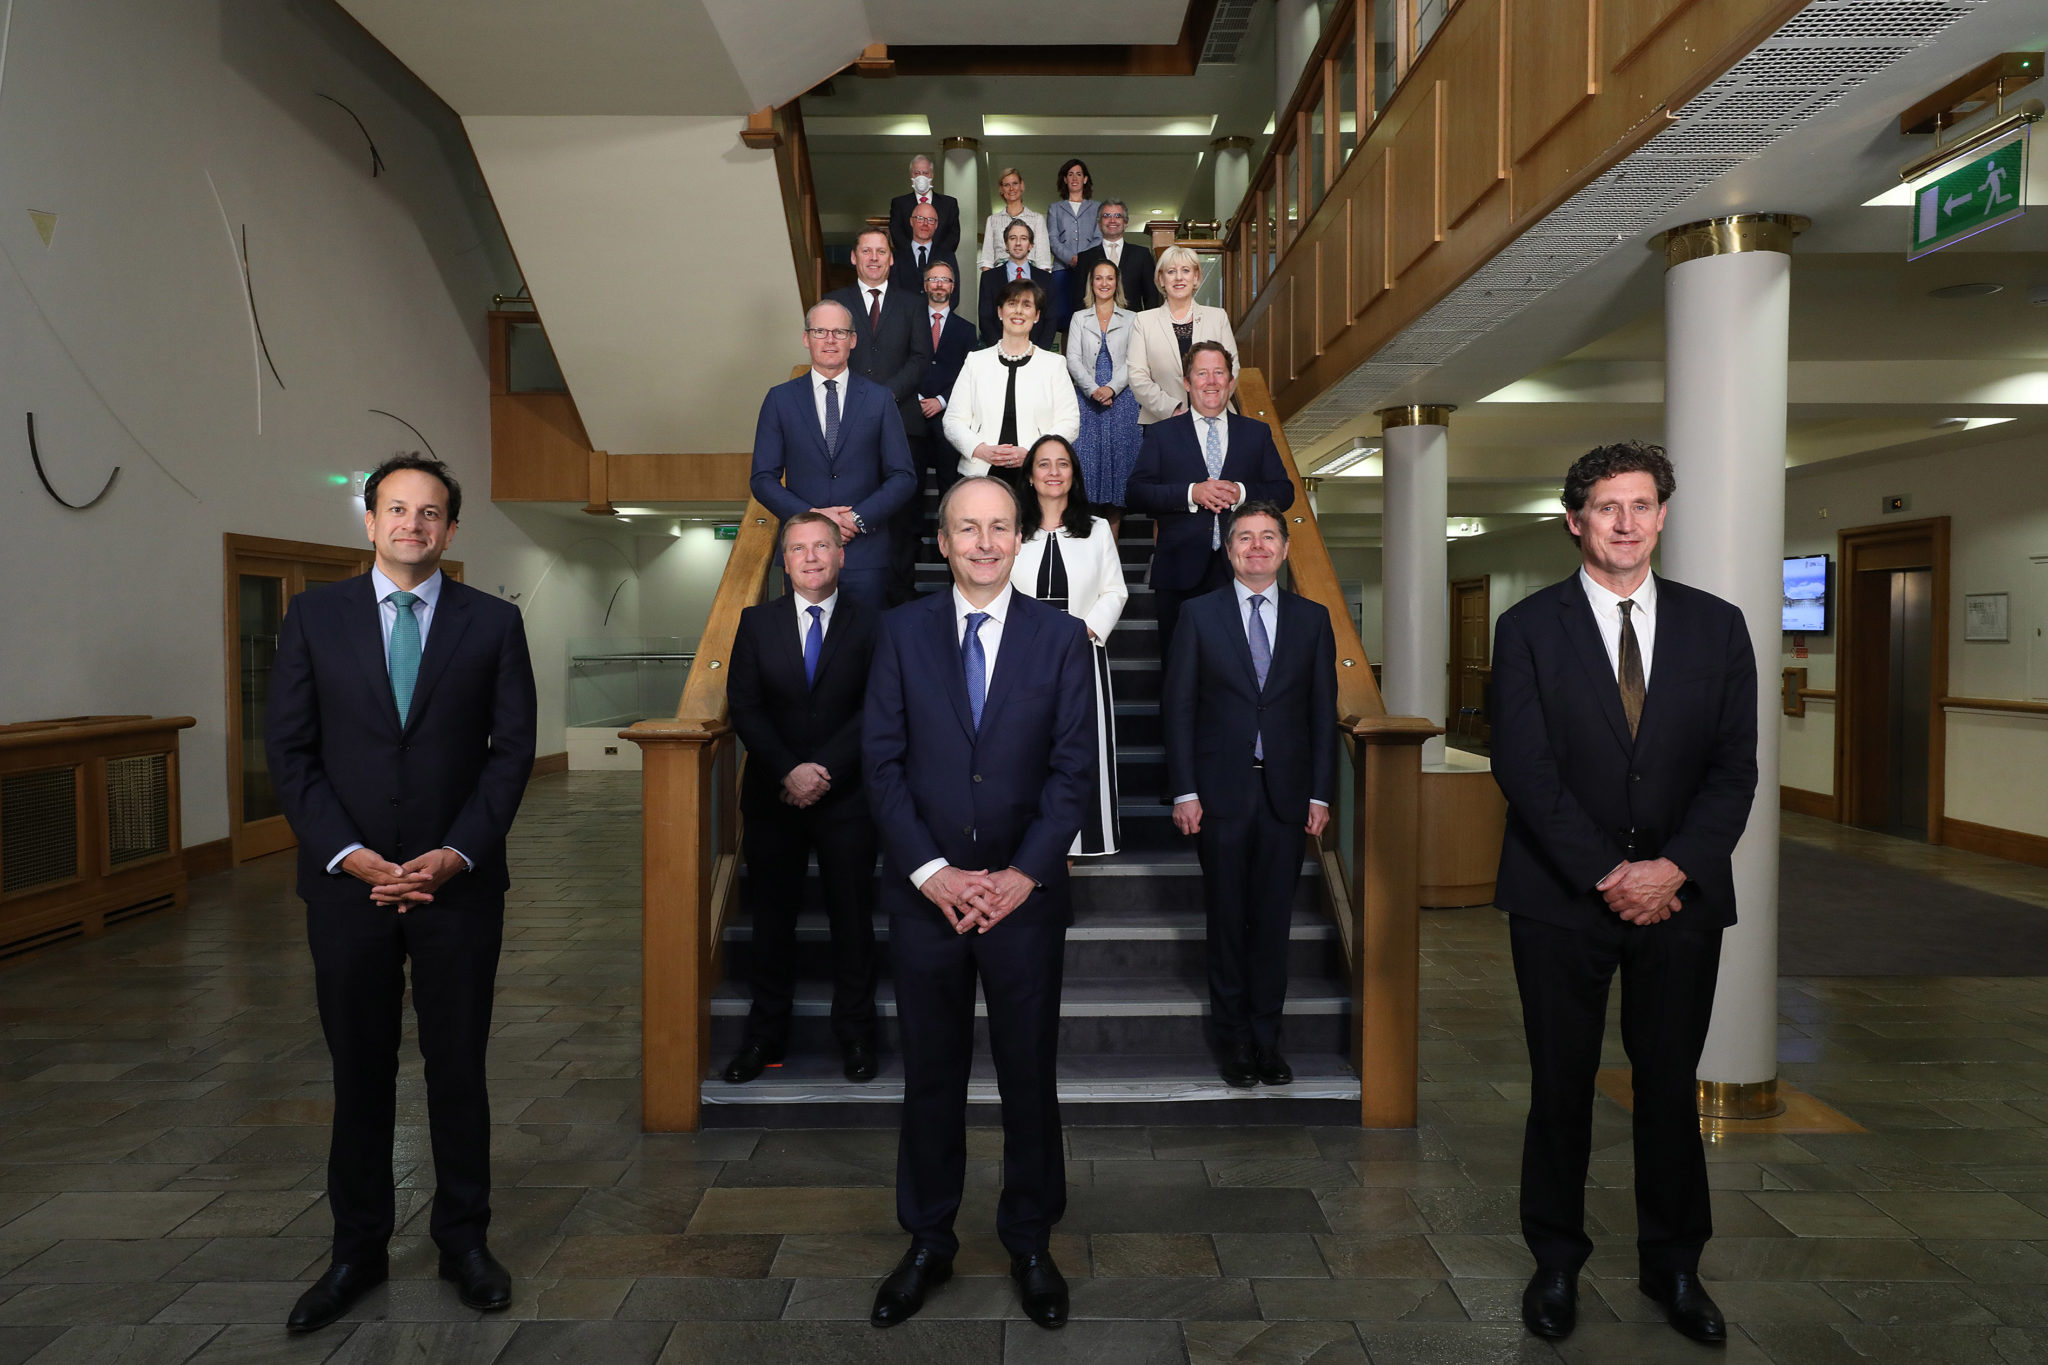 Newly elected Cabinet of the 33rd Dail met for their first cabinet meeting in Dublin Castle at Dublin Castle on June 27th 2020